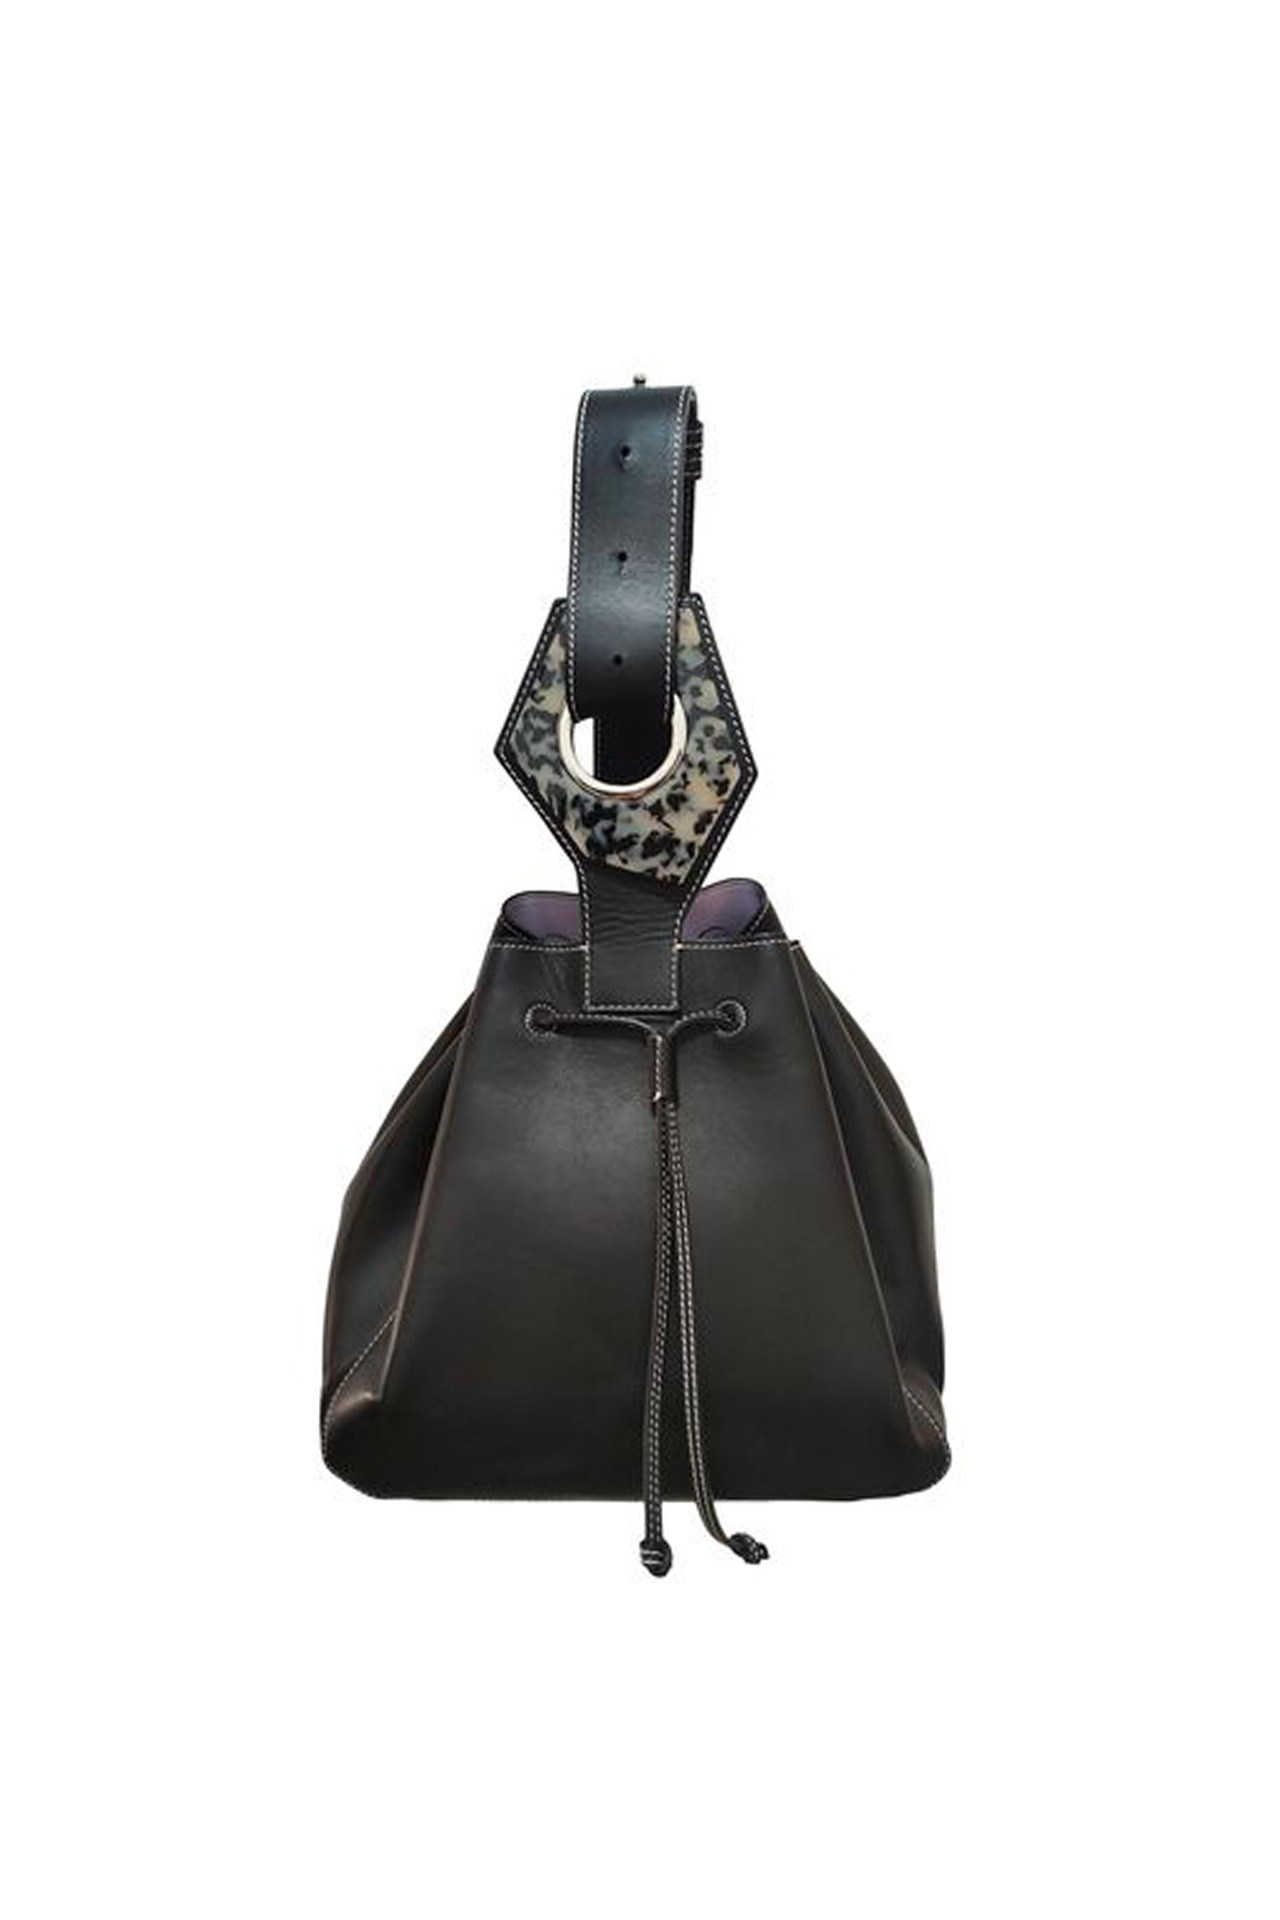 Leather bags for women, second-hand luxury bags - Vestiaire Collective